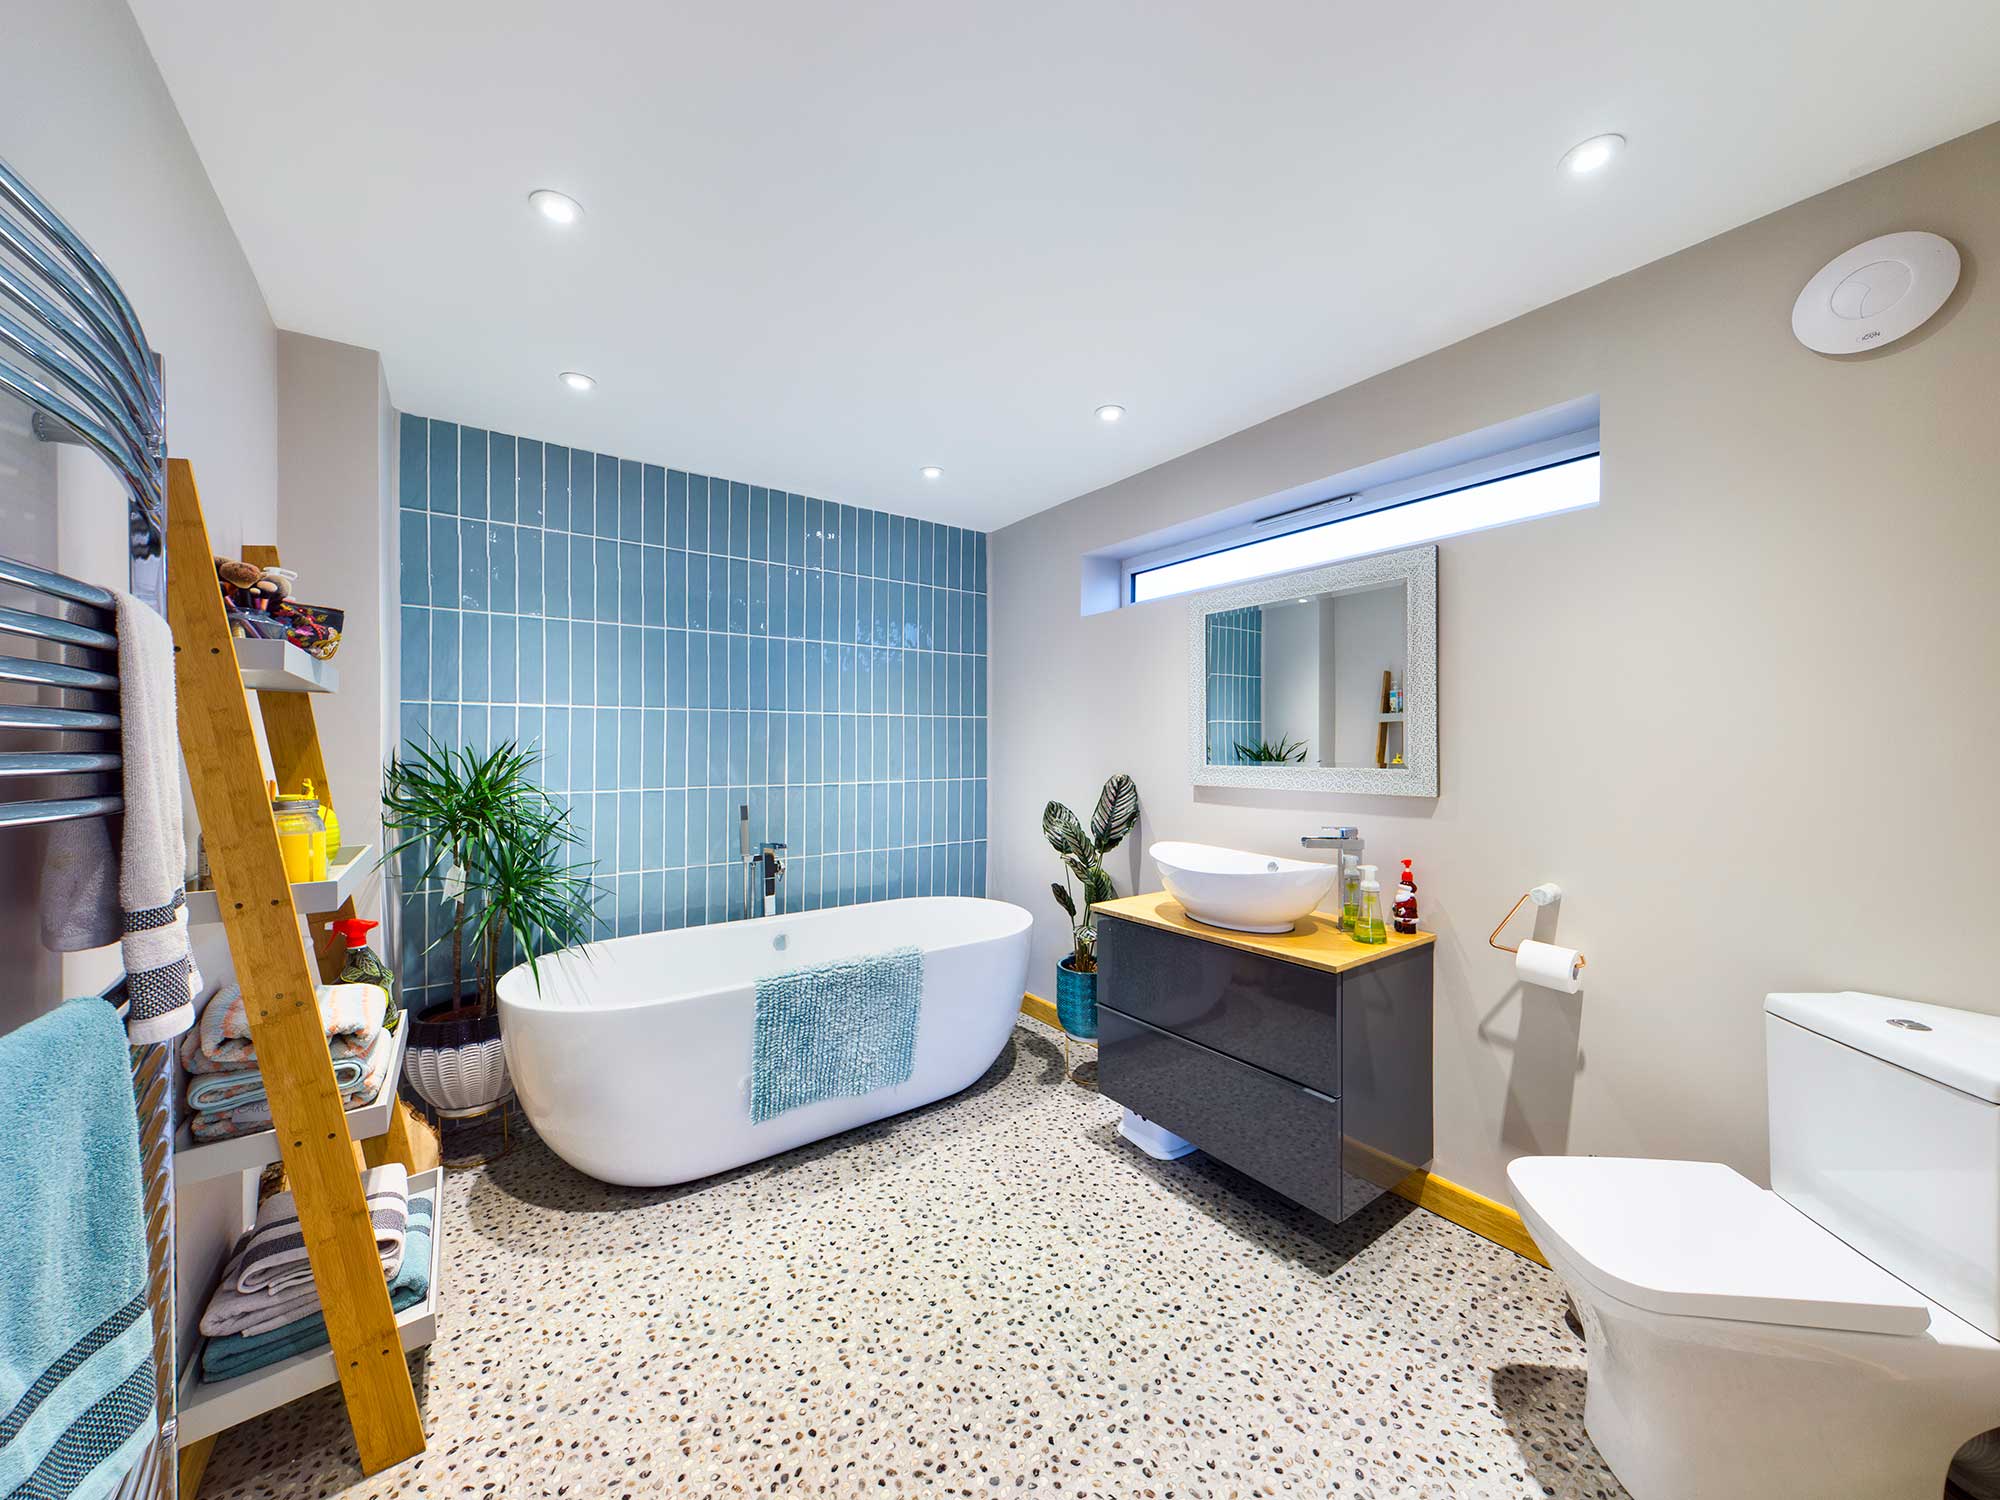 How Much Does A Bathroom Renovation Increase Home Value